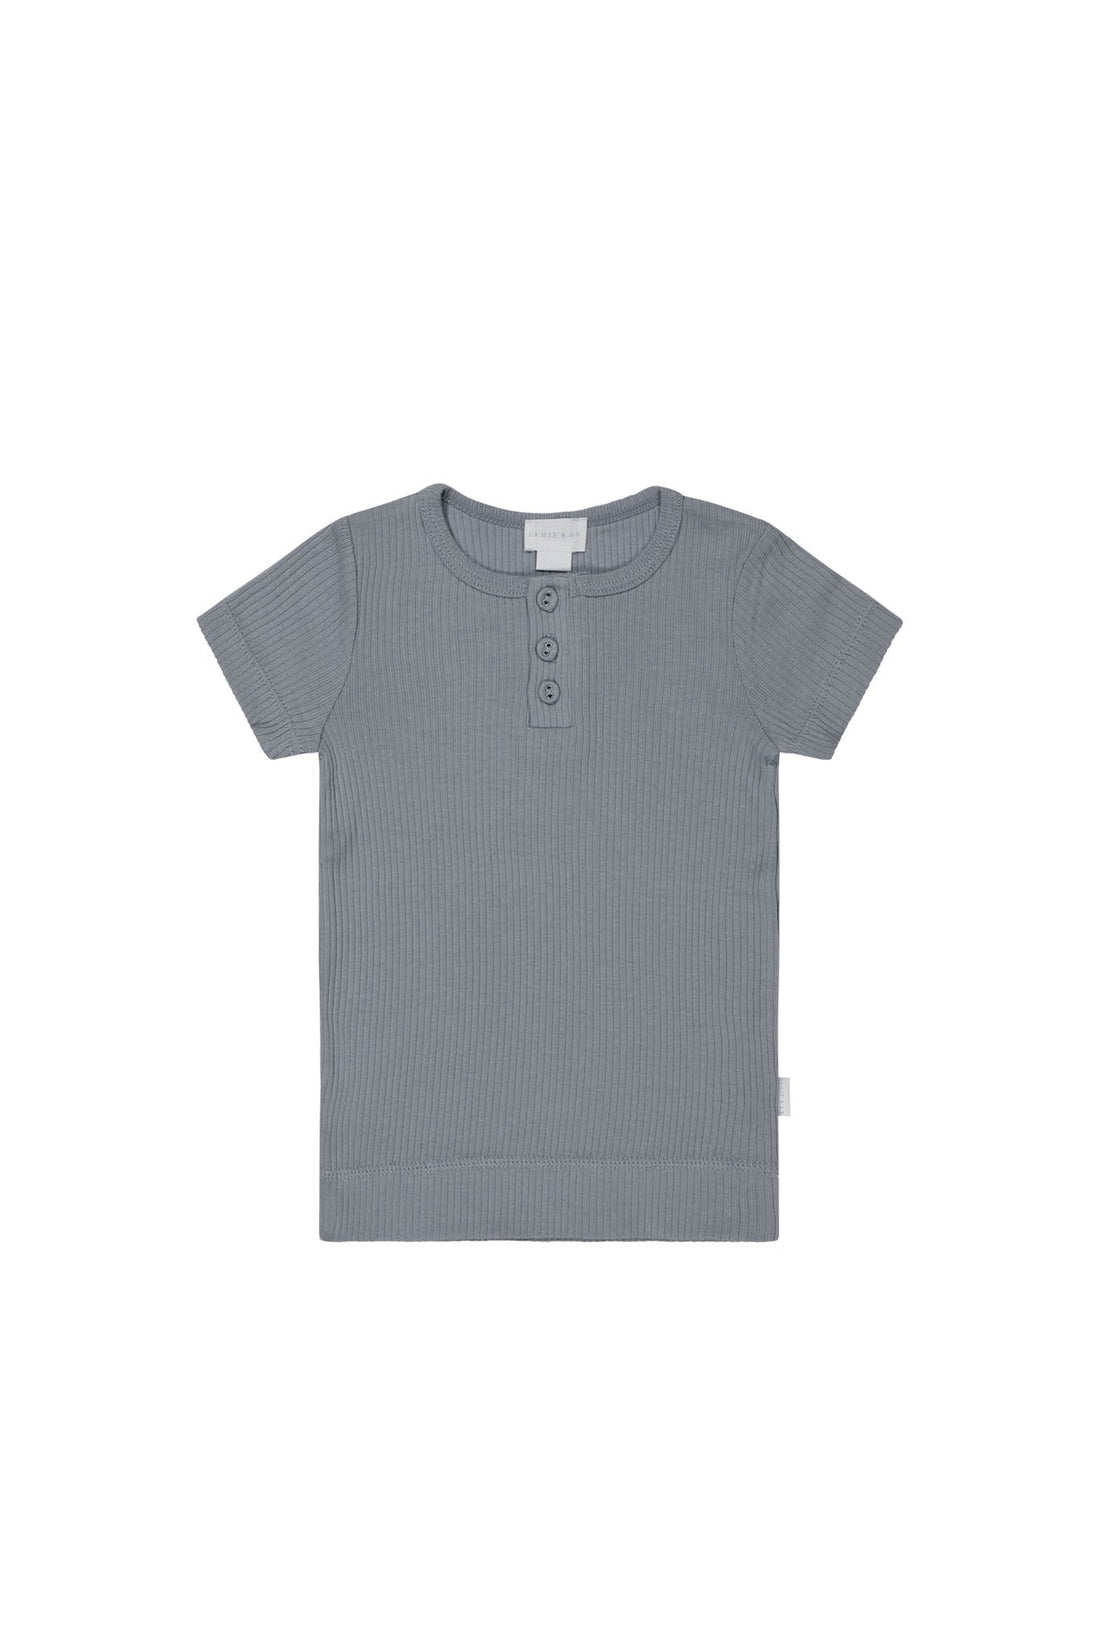 Organic Cotton Modal Henley Tee - Finch Childrens Top from Jamie Kay USA